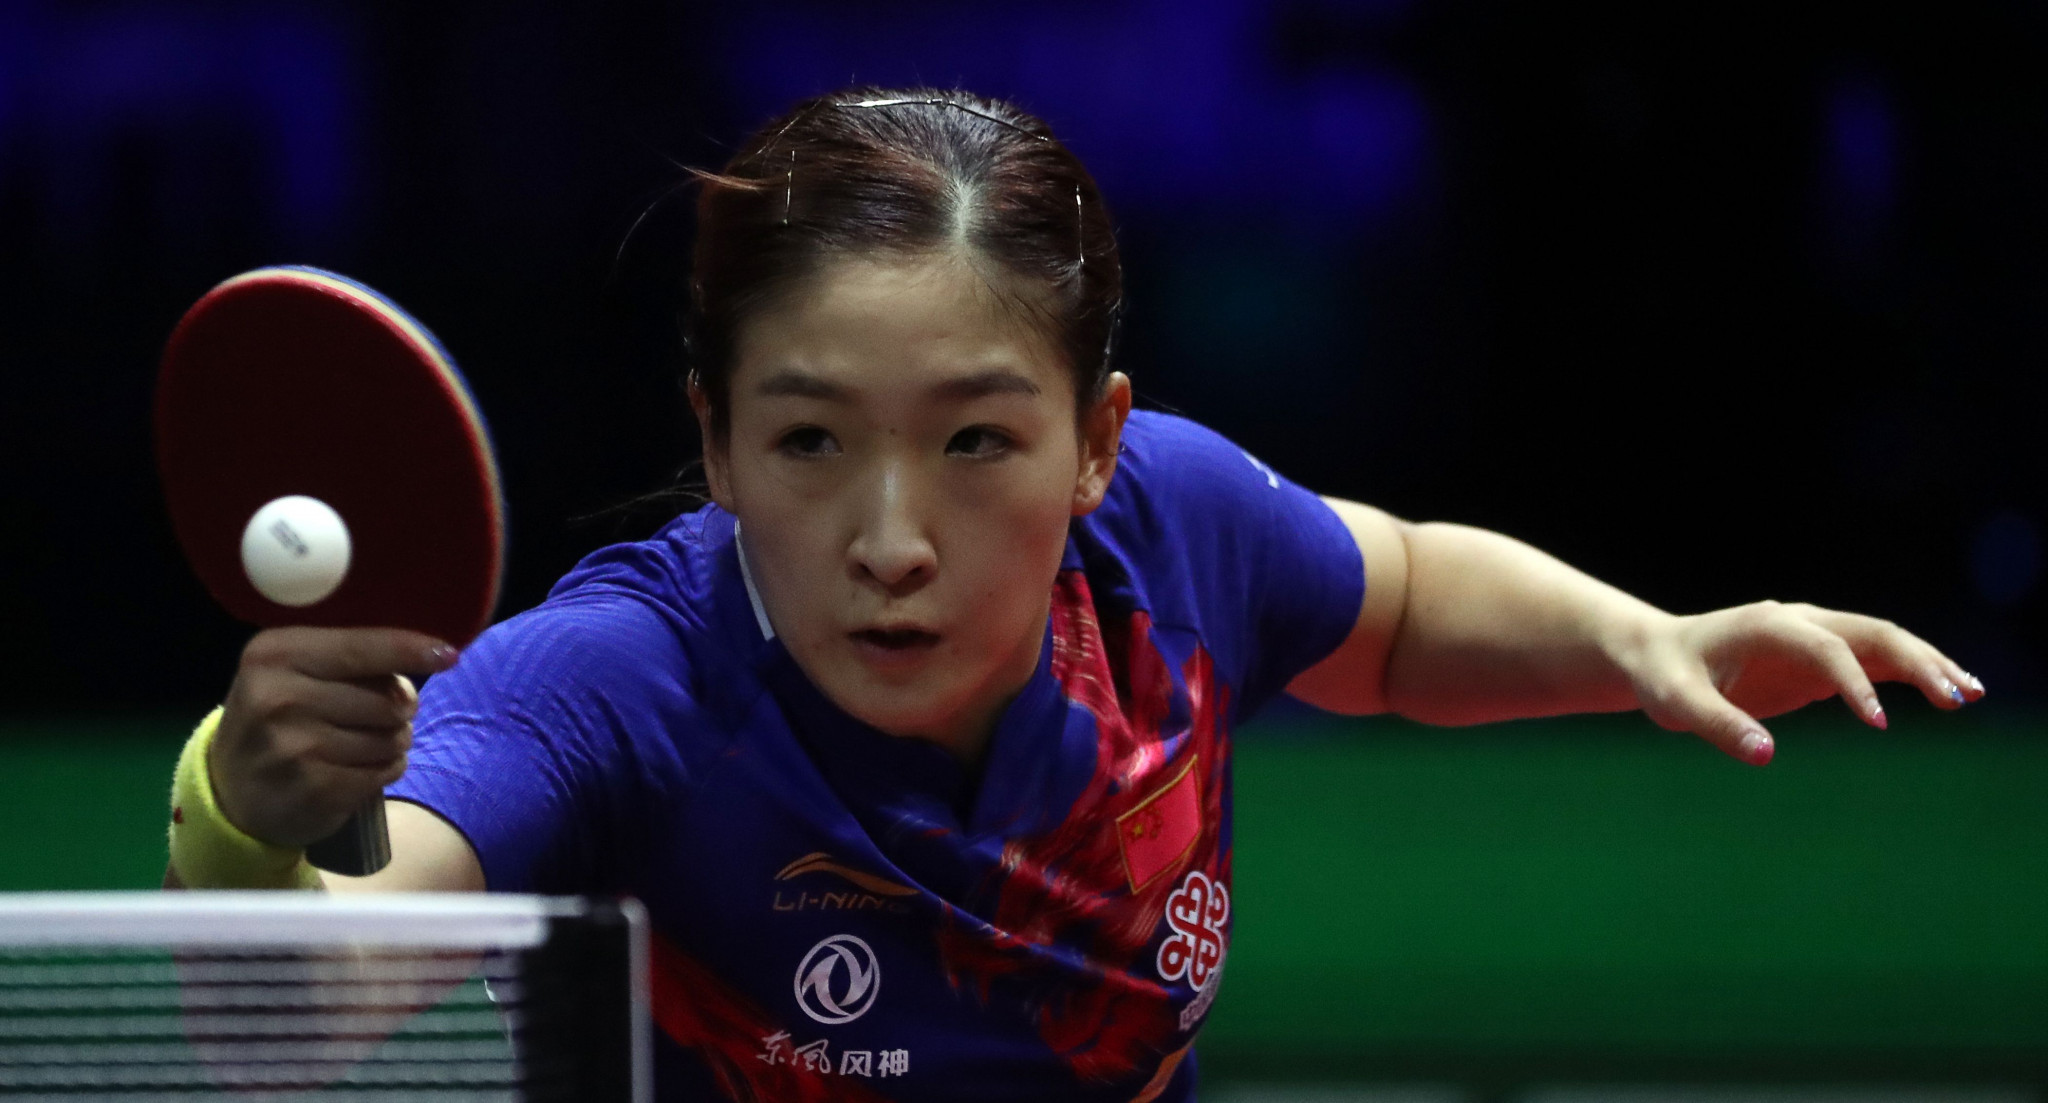 Liu Shiwen also stunned Ding Ning in the women's singles semi-finals ©Getty Images